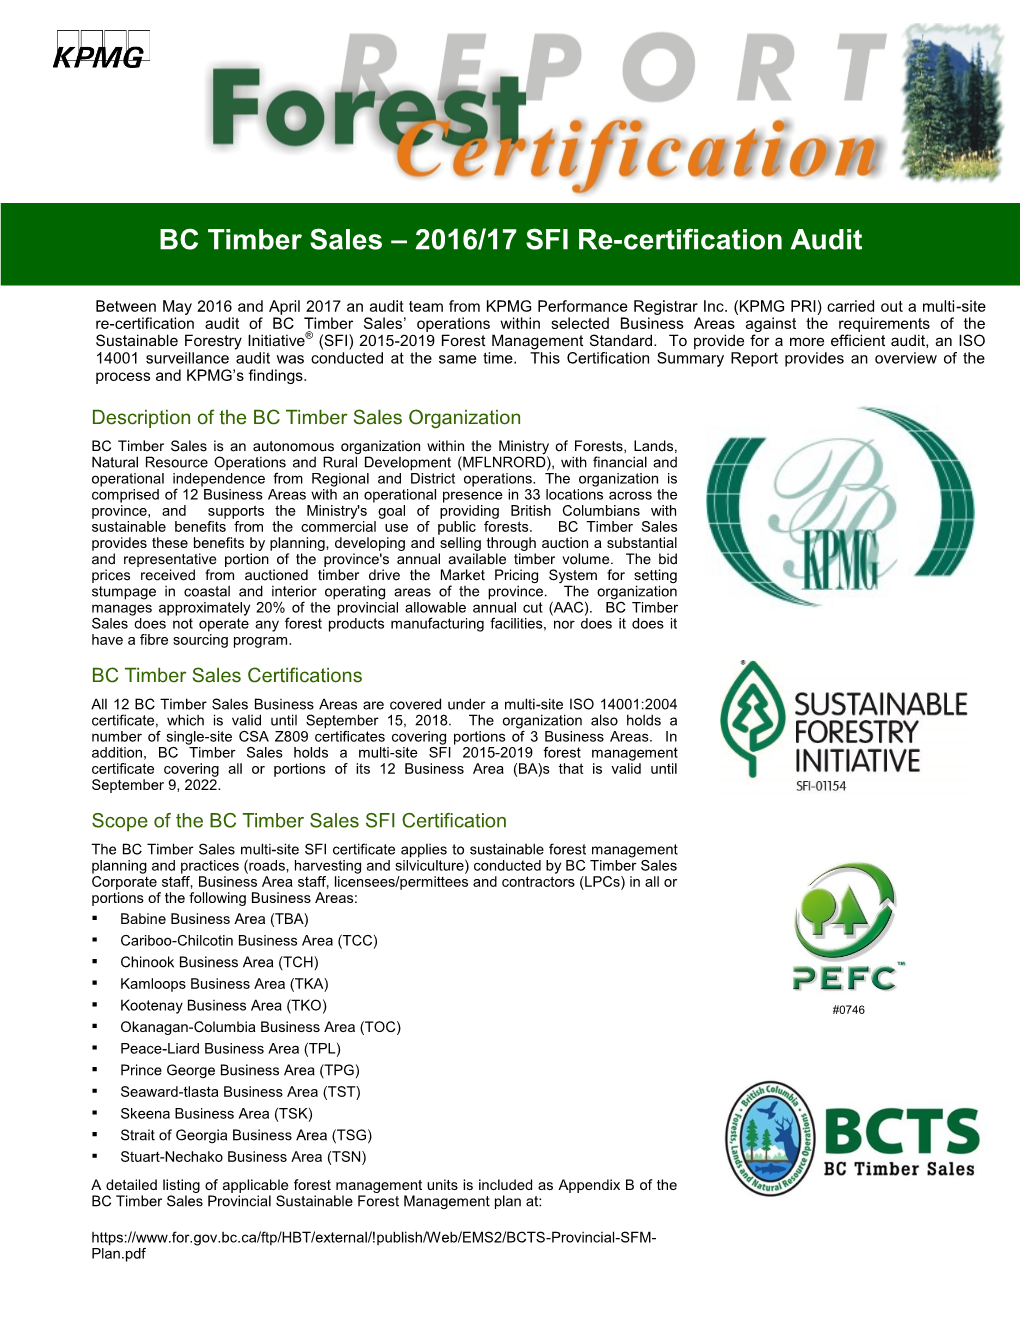 BC Timber Sales – 2016/17 SFI Re-Certification Audit